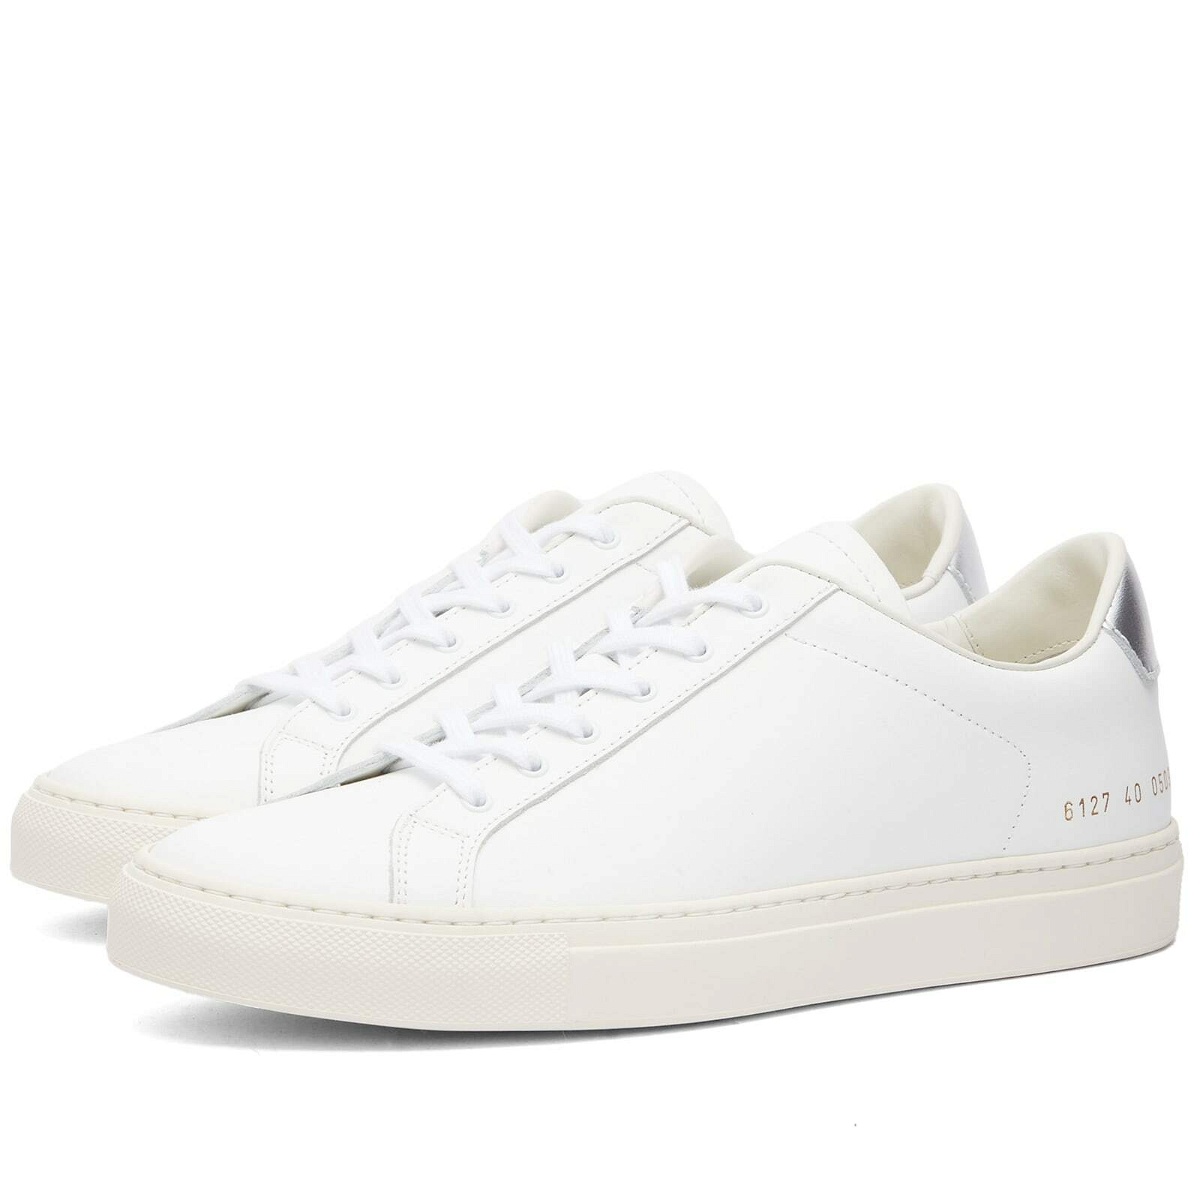 Woman by Common Projects Women's Retro Classic Trainers Sneakers in ...